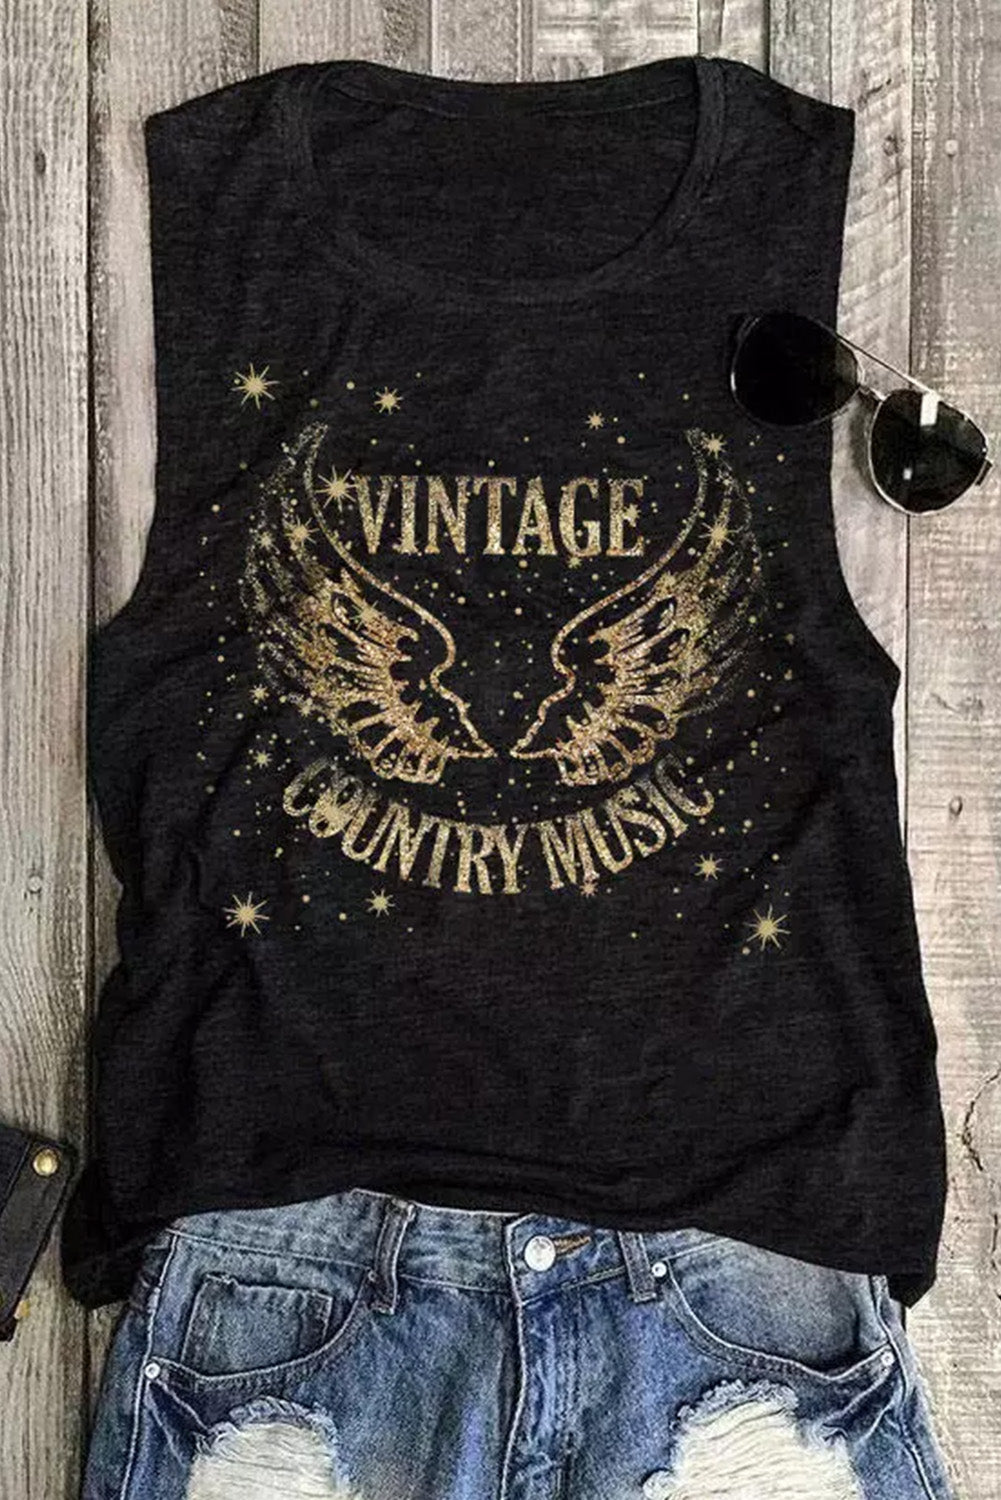 Vintage Country Music Wing Glitter Print Tank Top